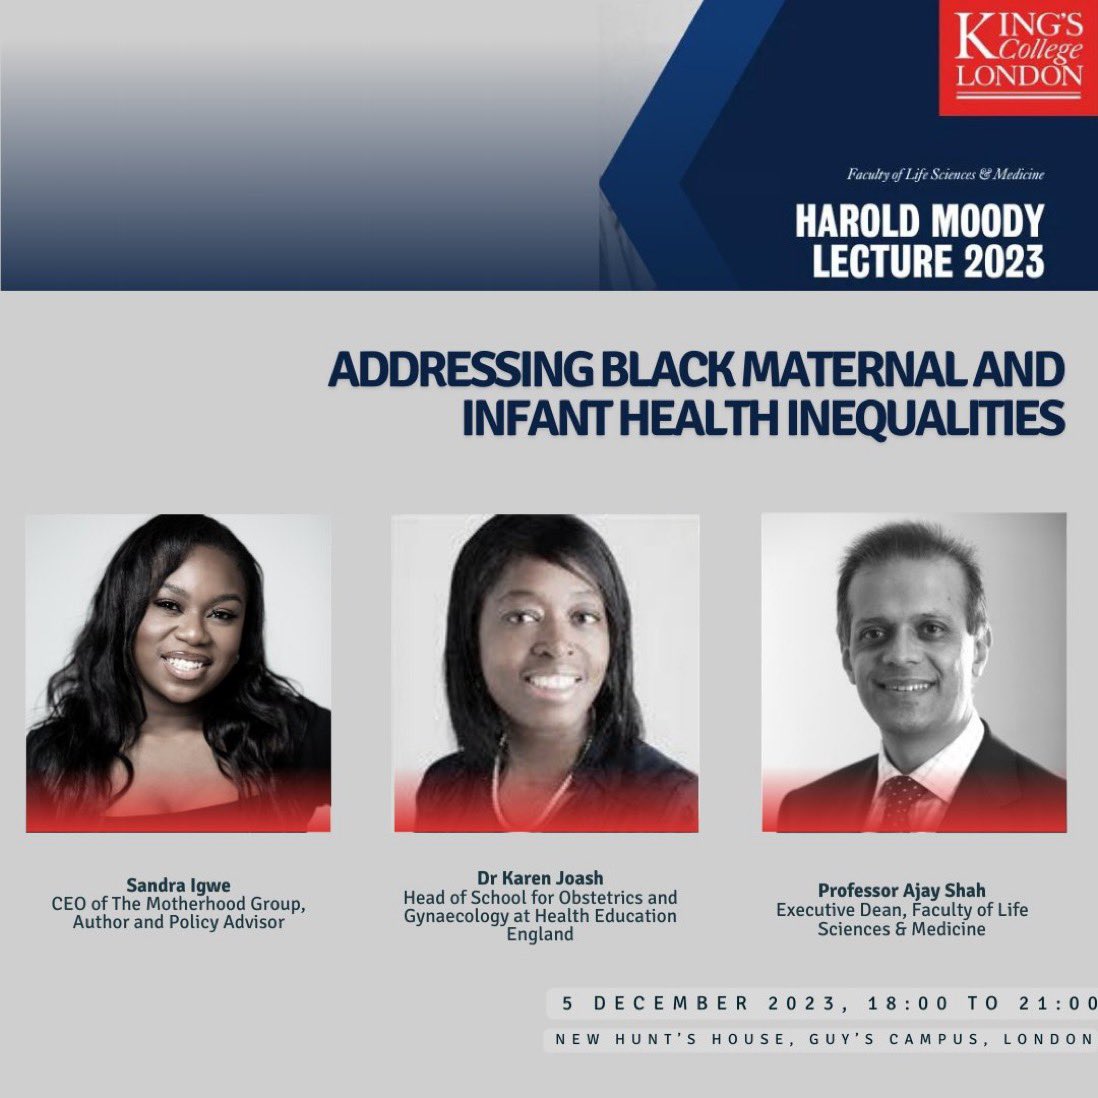 Thank you @KingsCollegeLon for having us speak at the ‘Addressing Black Maternal & Infant Health Inequalities’ event this evening. We touched on co-creating services, the role of racism in maternal care, holistic care approaches and improving representation+ more.